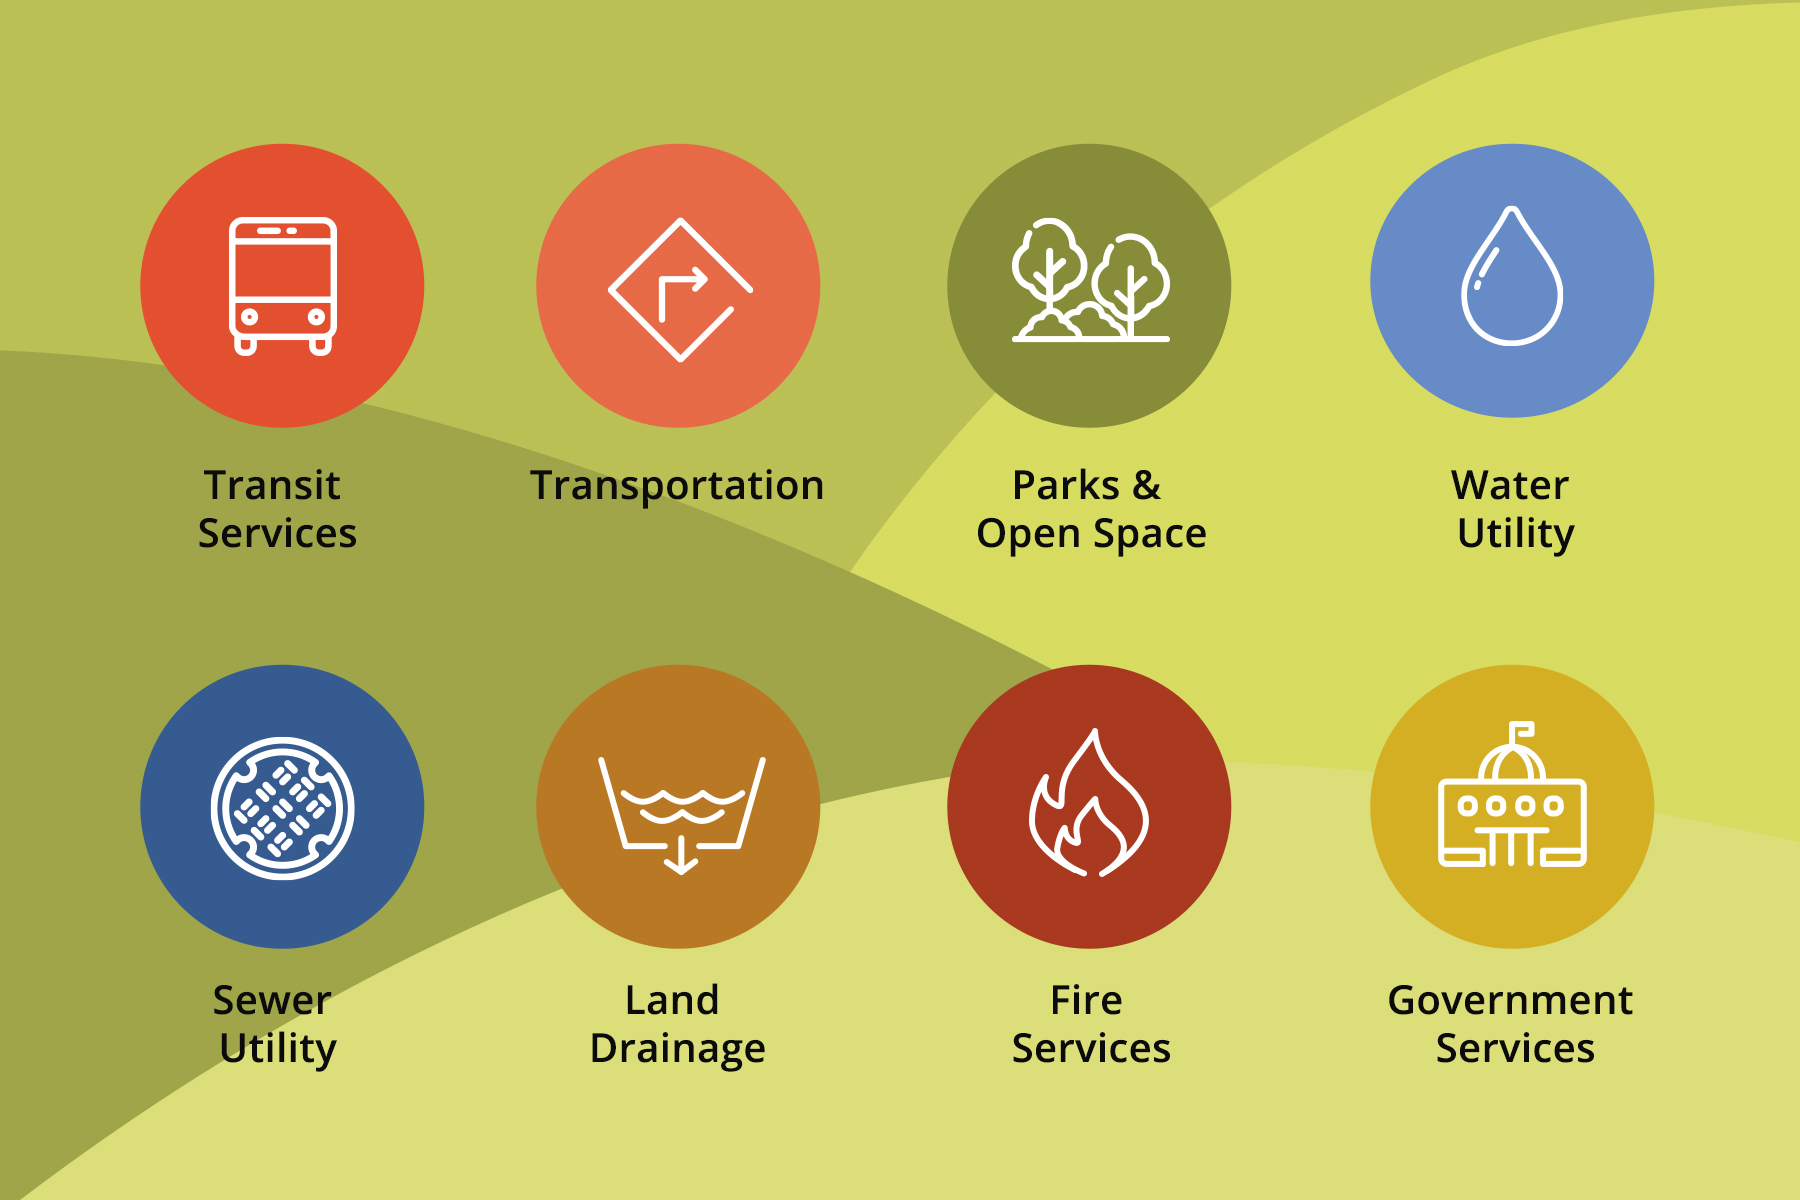 Pictogram of the following Selkirk services: Transit Services, Transportation, Parks & Open Space, Water Utility, Sewer Utility, Land Drainage, Fire Services, Government Services